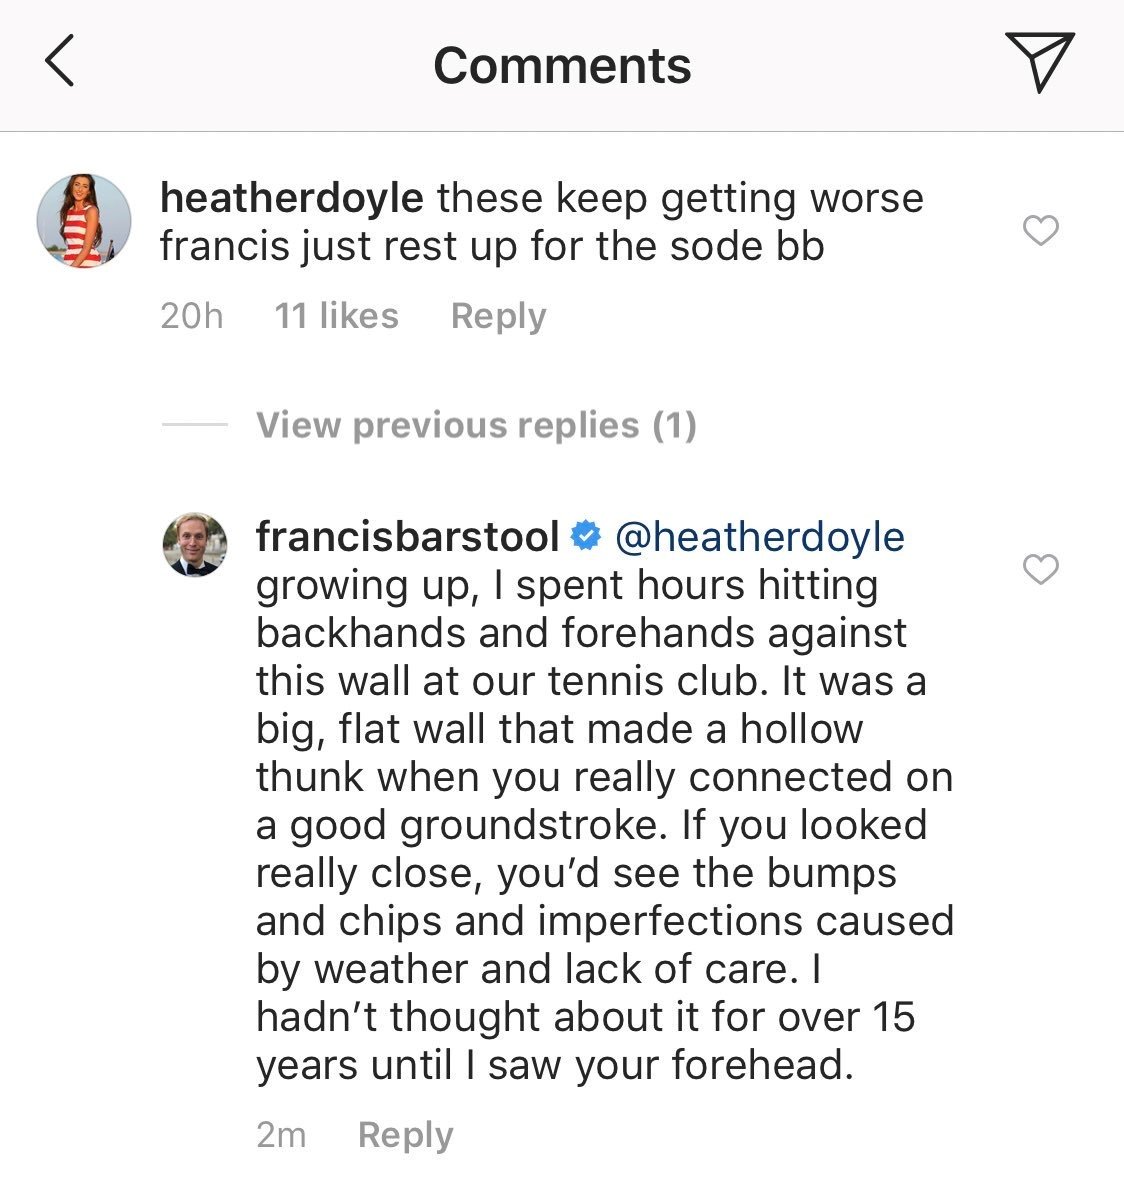 document - heatherdoyle these keep getting worse francis just rest up for the sode bb 20h 11 View previous replies 1 francisbarstool growing up, I spent hours hitting backhands and forehands against this wall at our tennis club. It was a big, flat wall th